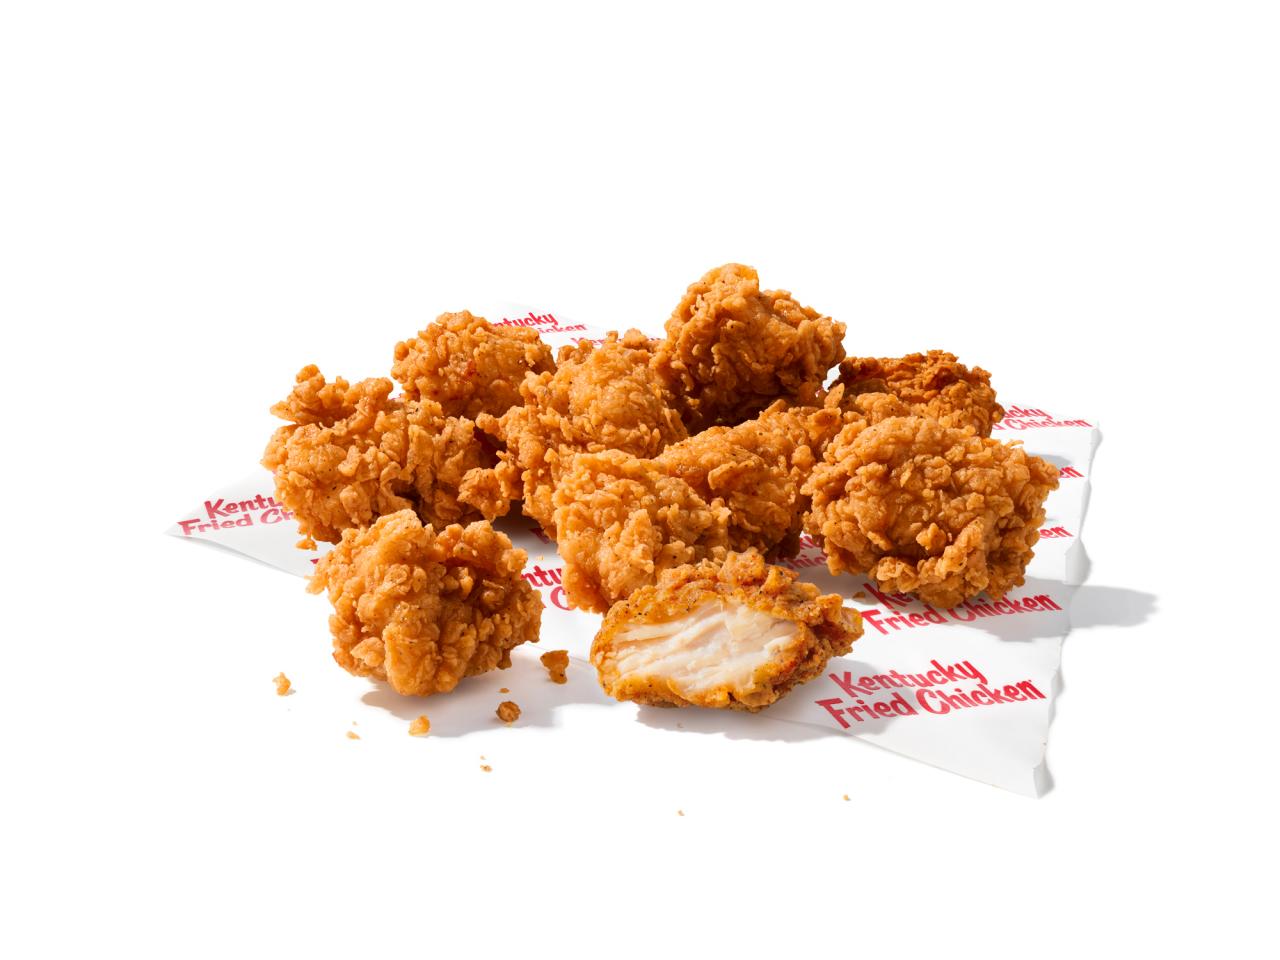 Kfc Brings Its Fried Chicken Nuggets Nationwide On March 27, 2023 | Fn Dish  - Behind-The-Scenes, Food Trends, And Best Recipes : Food Network | Food  Network